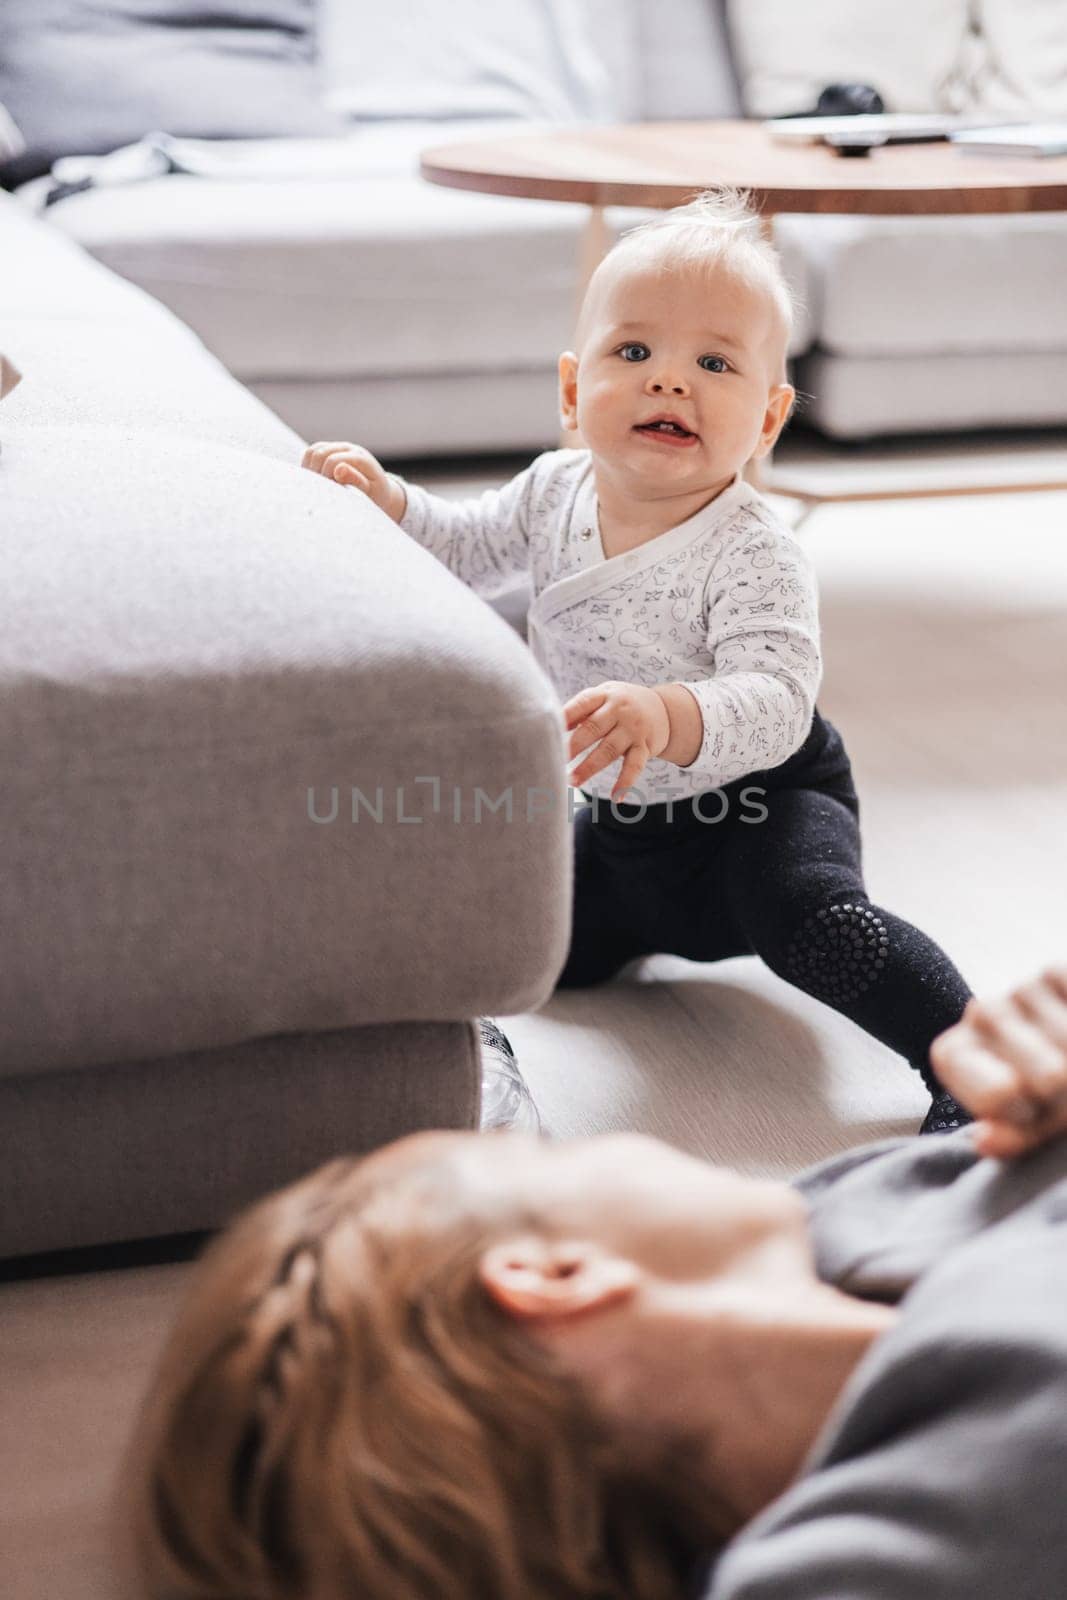 Happy family moments. Mother lying comfortably on children's mat playing with her baby boy watching and suppervising his first steps. Positive human emotions, feelings, joy